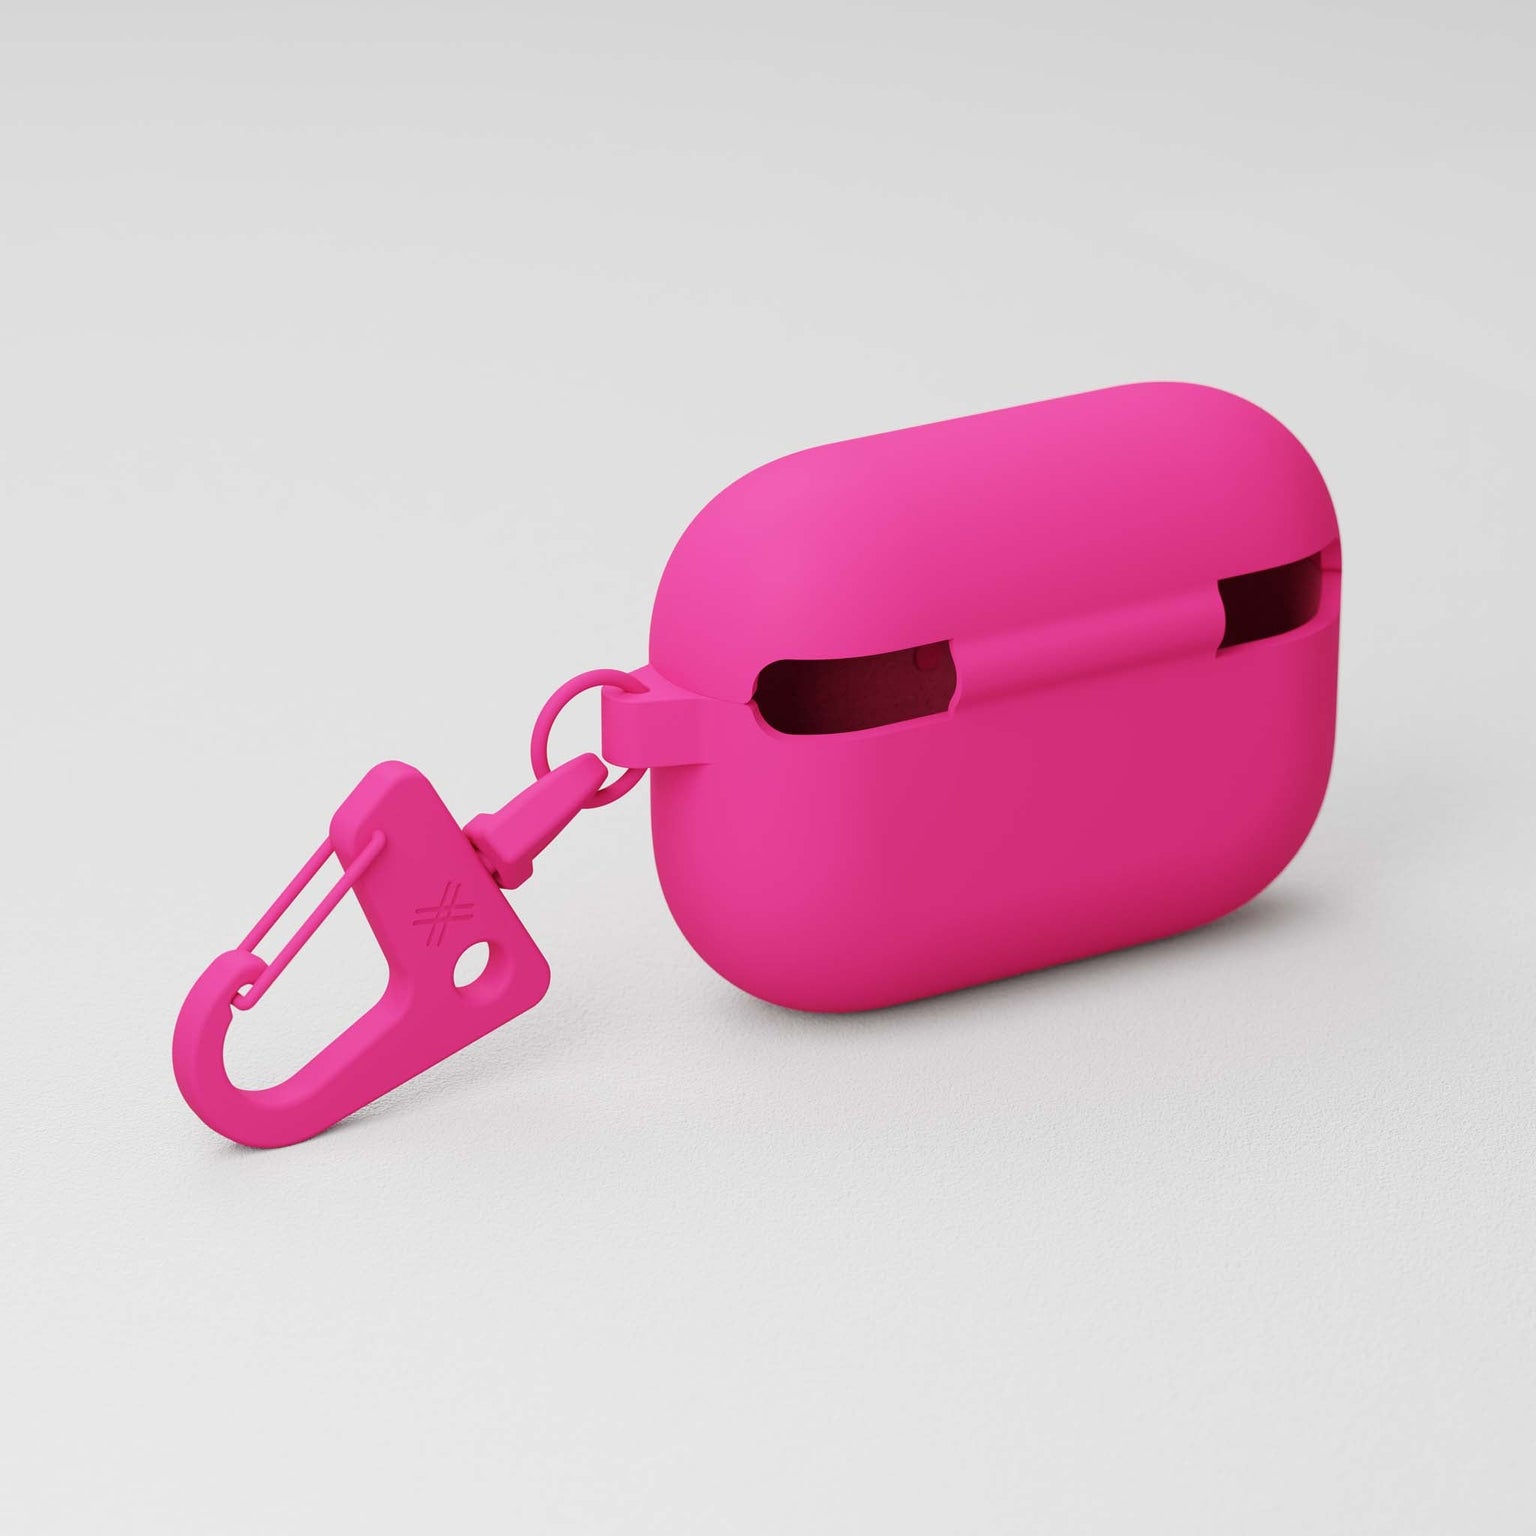 Apple AirPods Pro case in Pink with soft-touch silicone and carabiner | XOUXOU